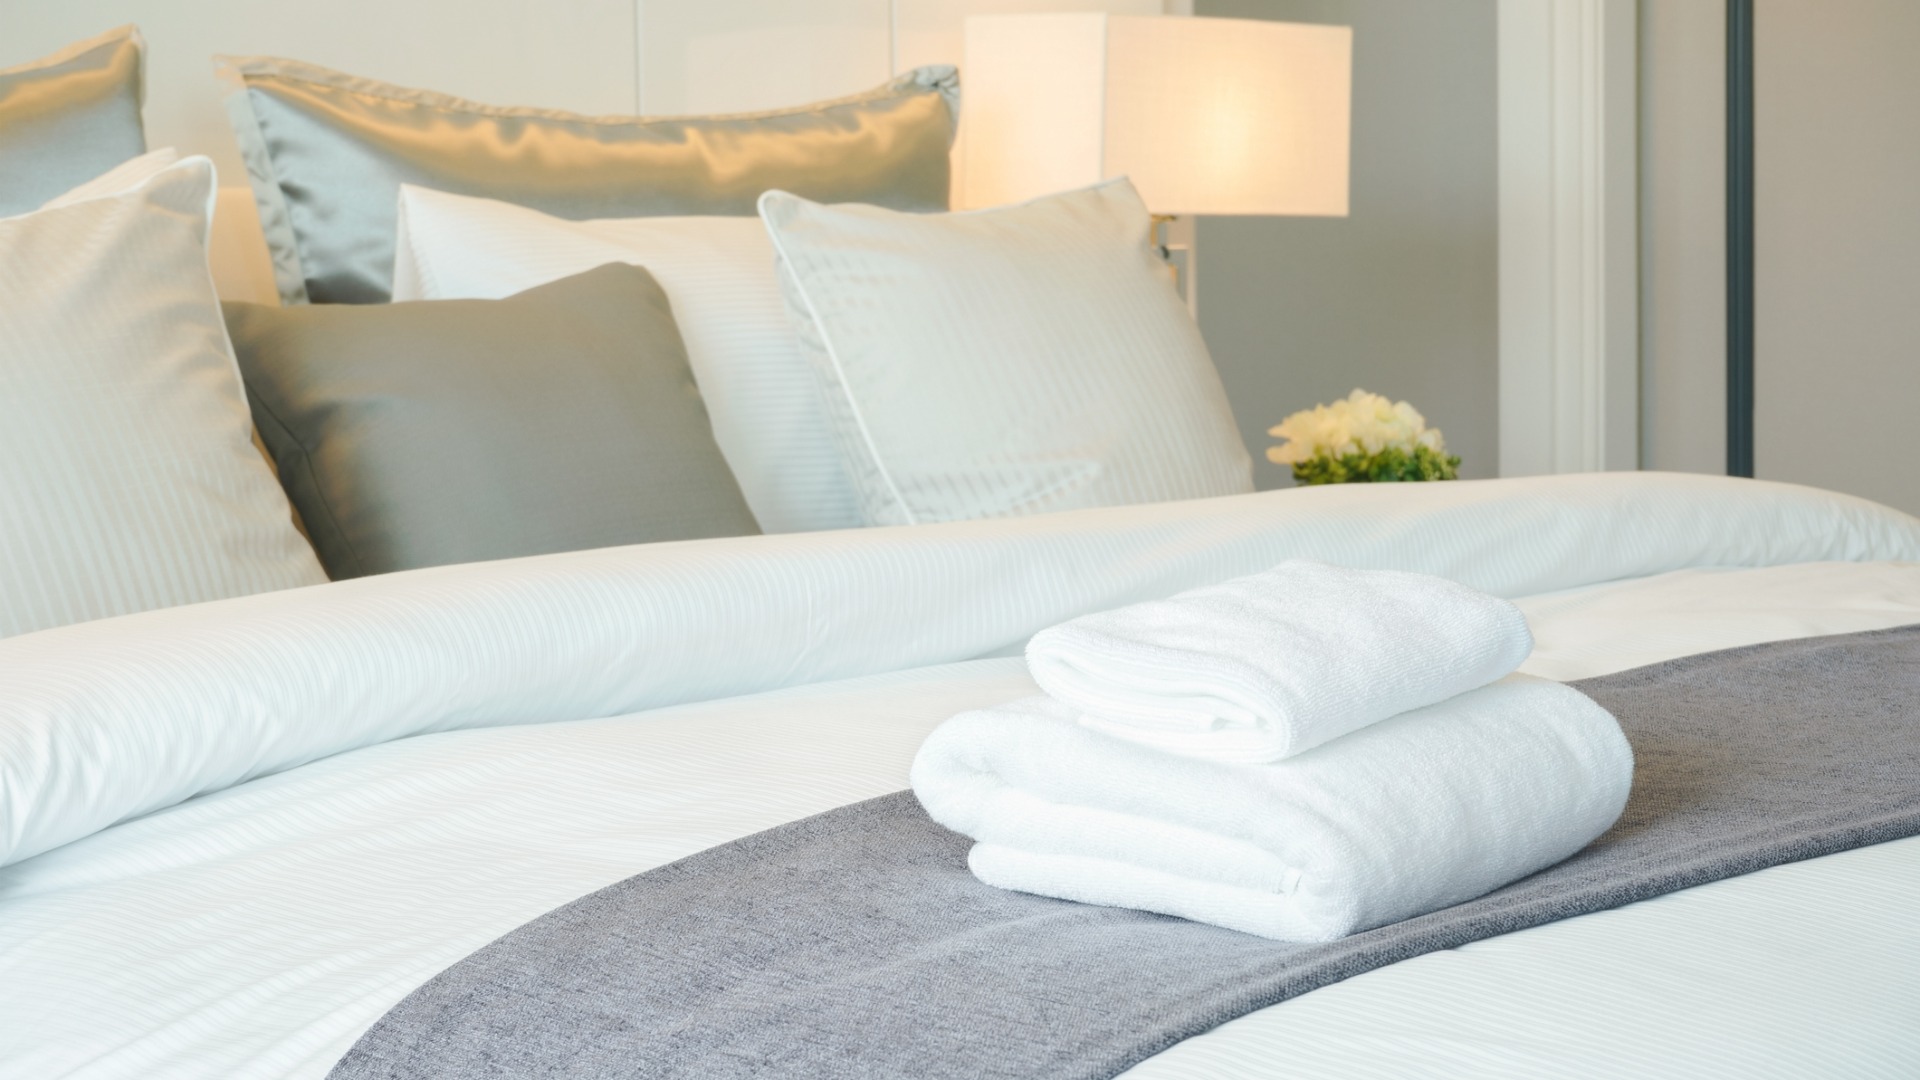 This is a close-up of a hotel bedroom. The bed is set and there are two fresh towels on the bed. 